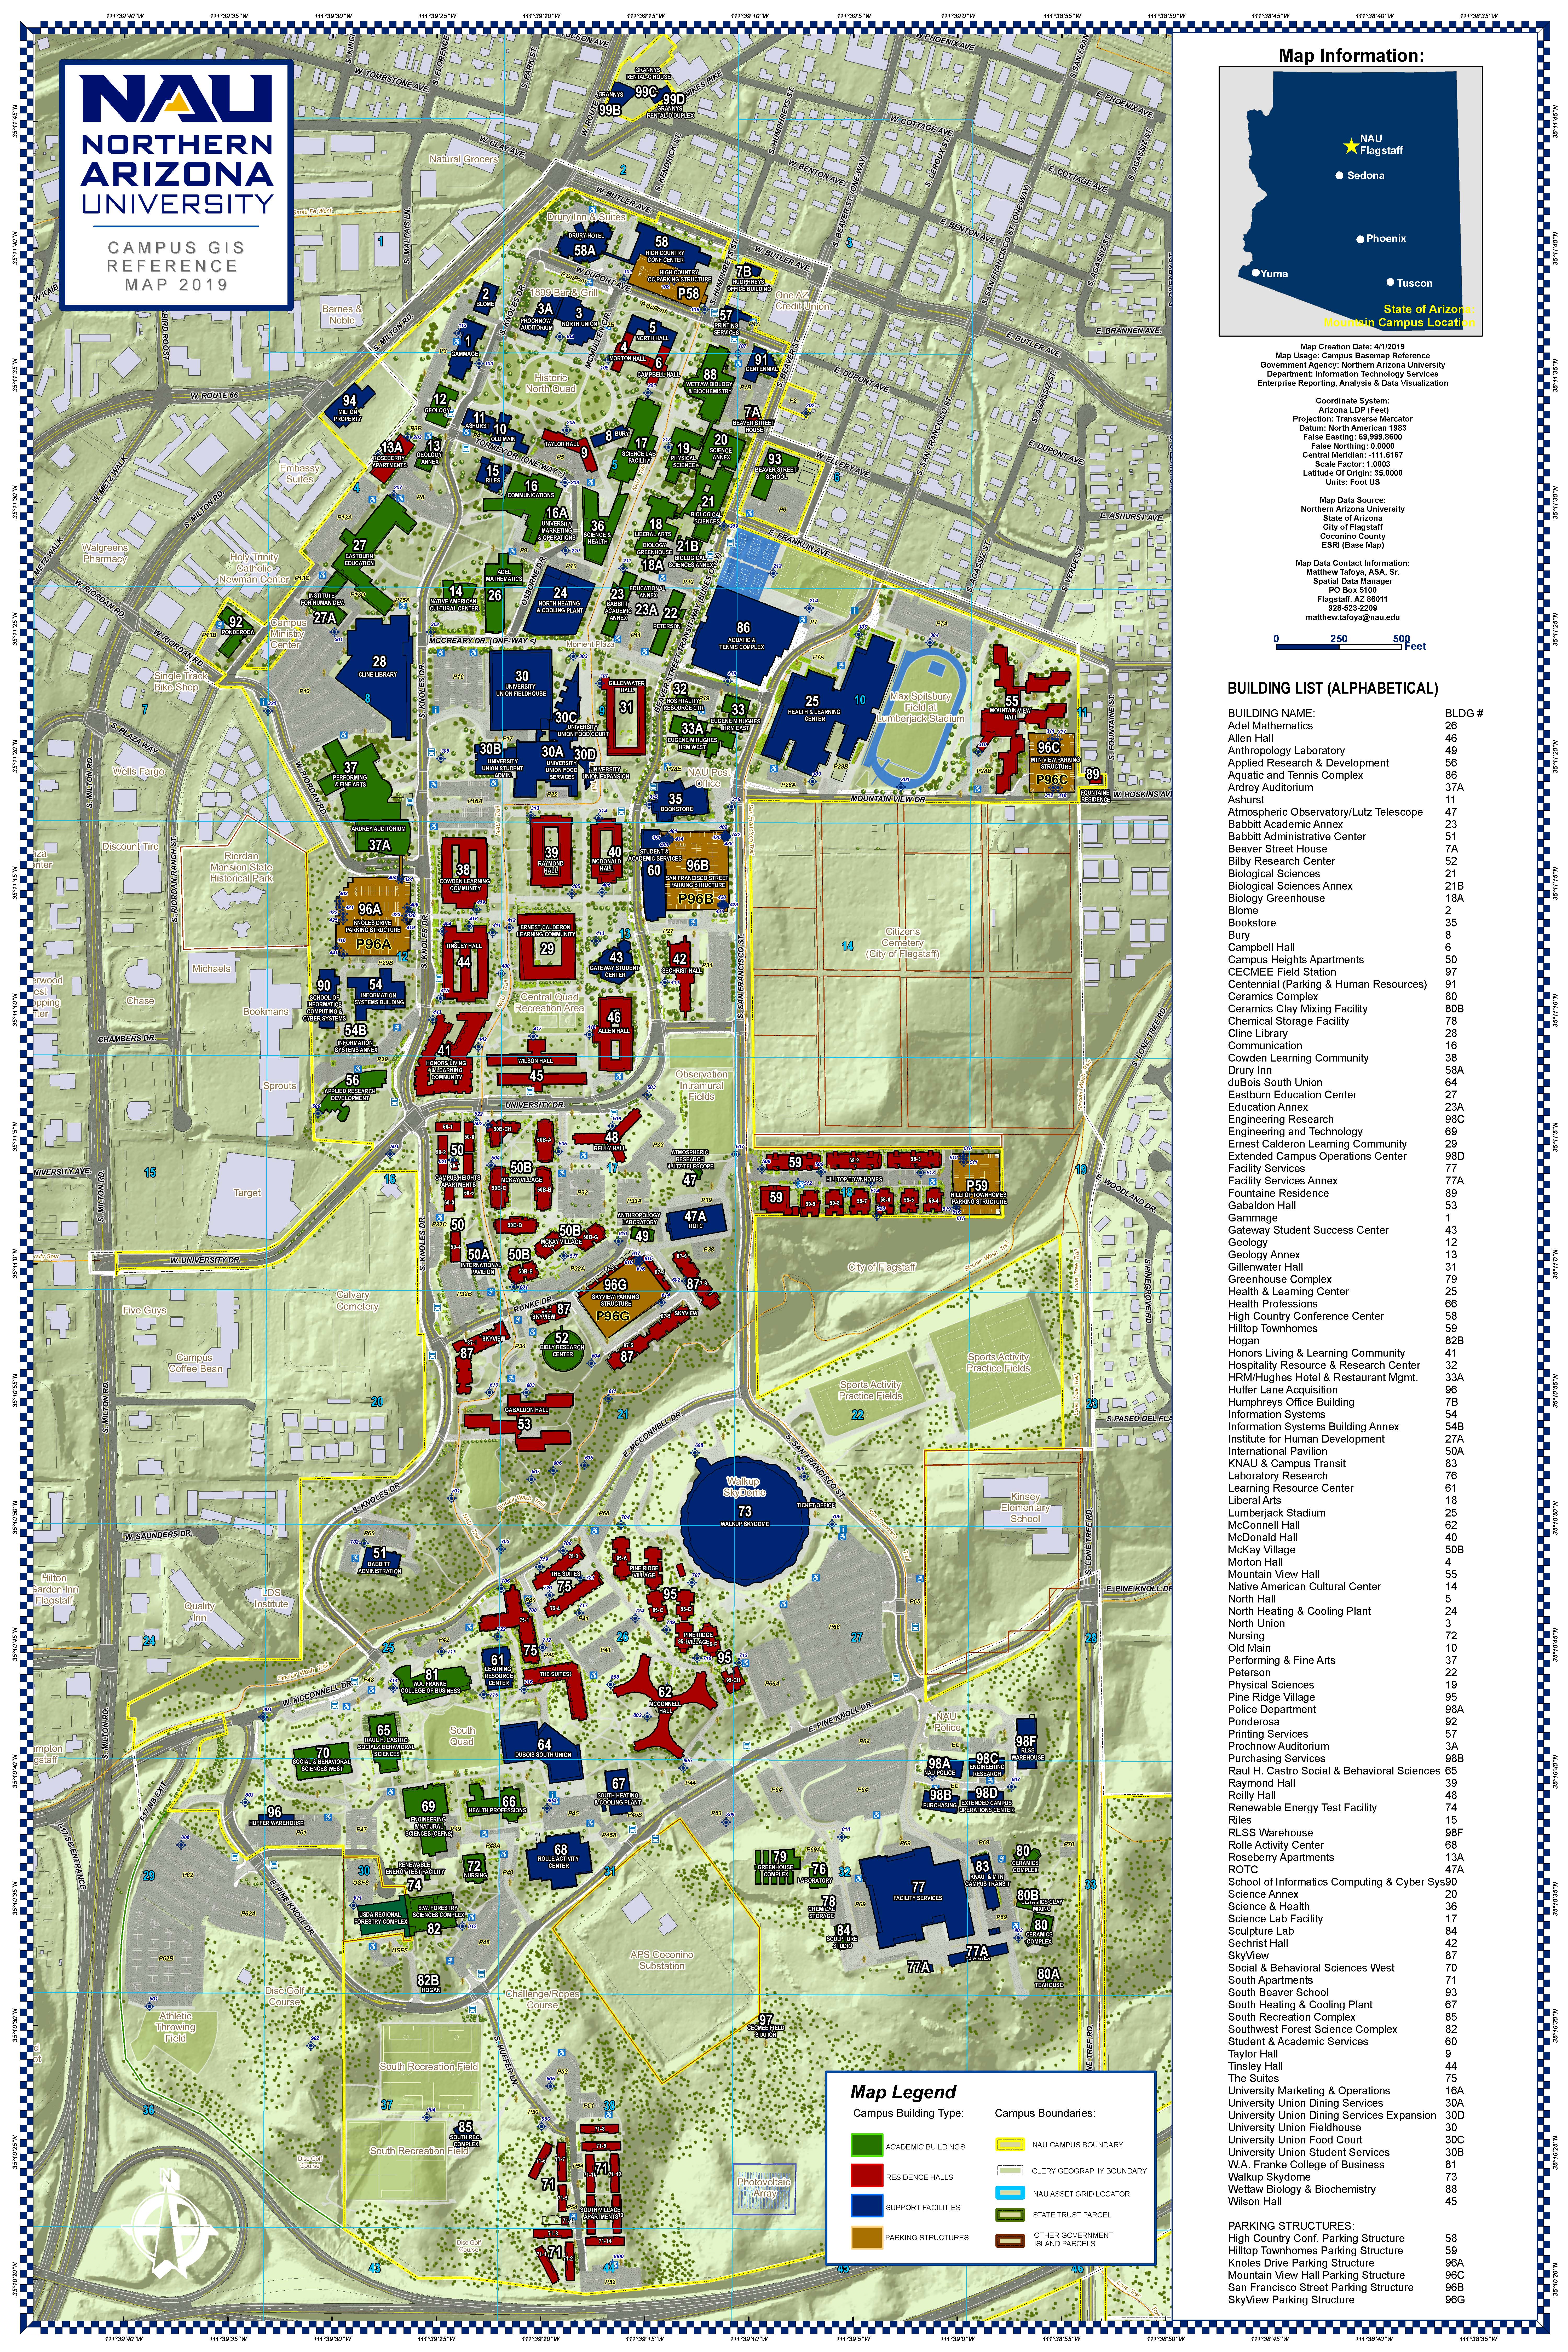 northern arizona university campus map Gis Campus Reference Maps Information Technology Services northern arizona university campus map